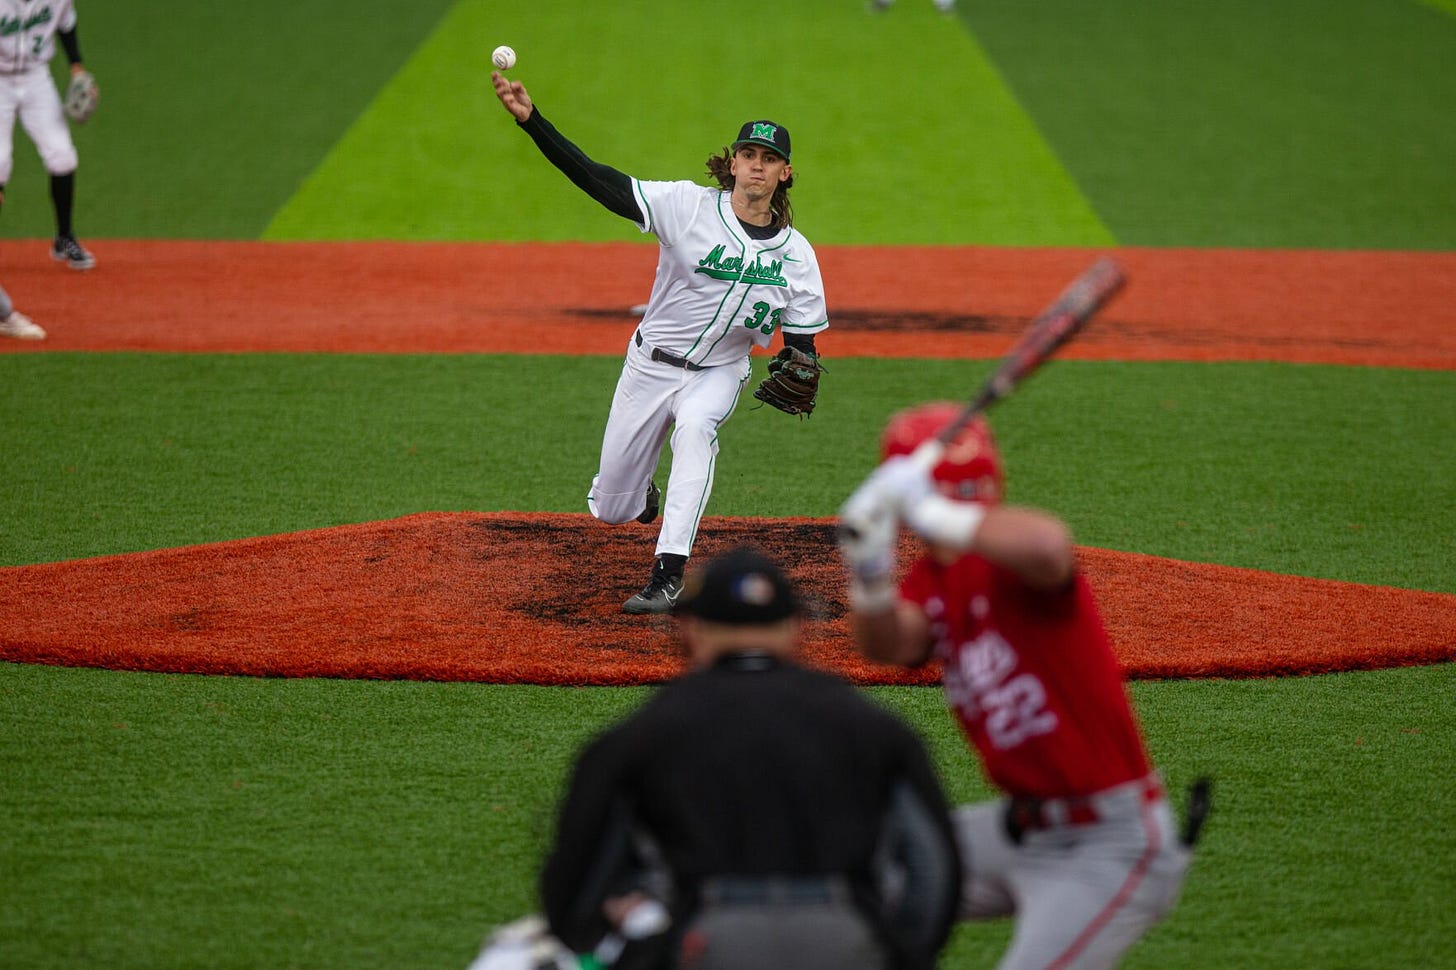 Marshall baseball: Herd pitcher Copen expects to be taken in MLB draft |  Sports | wvgazettemail.com